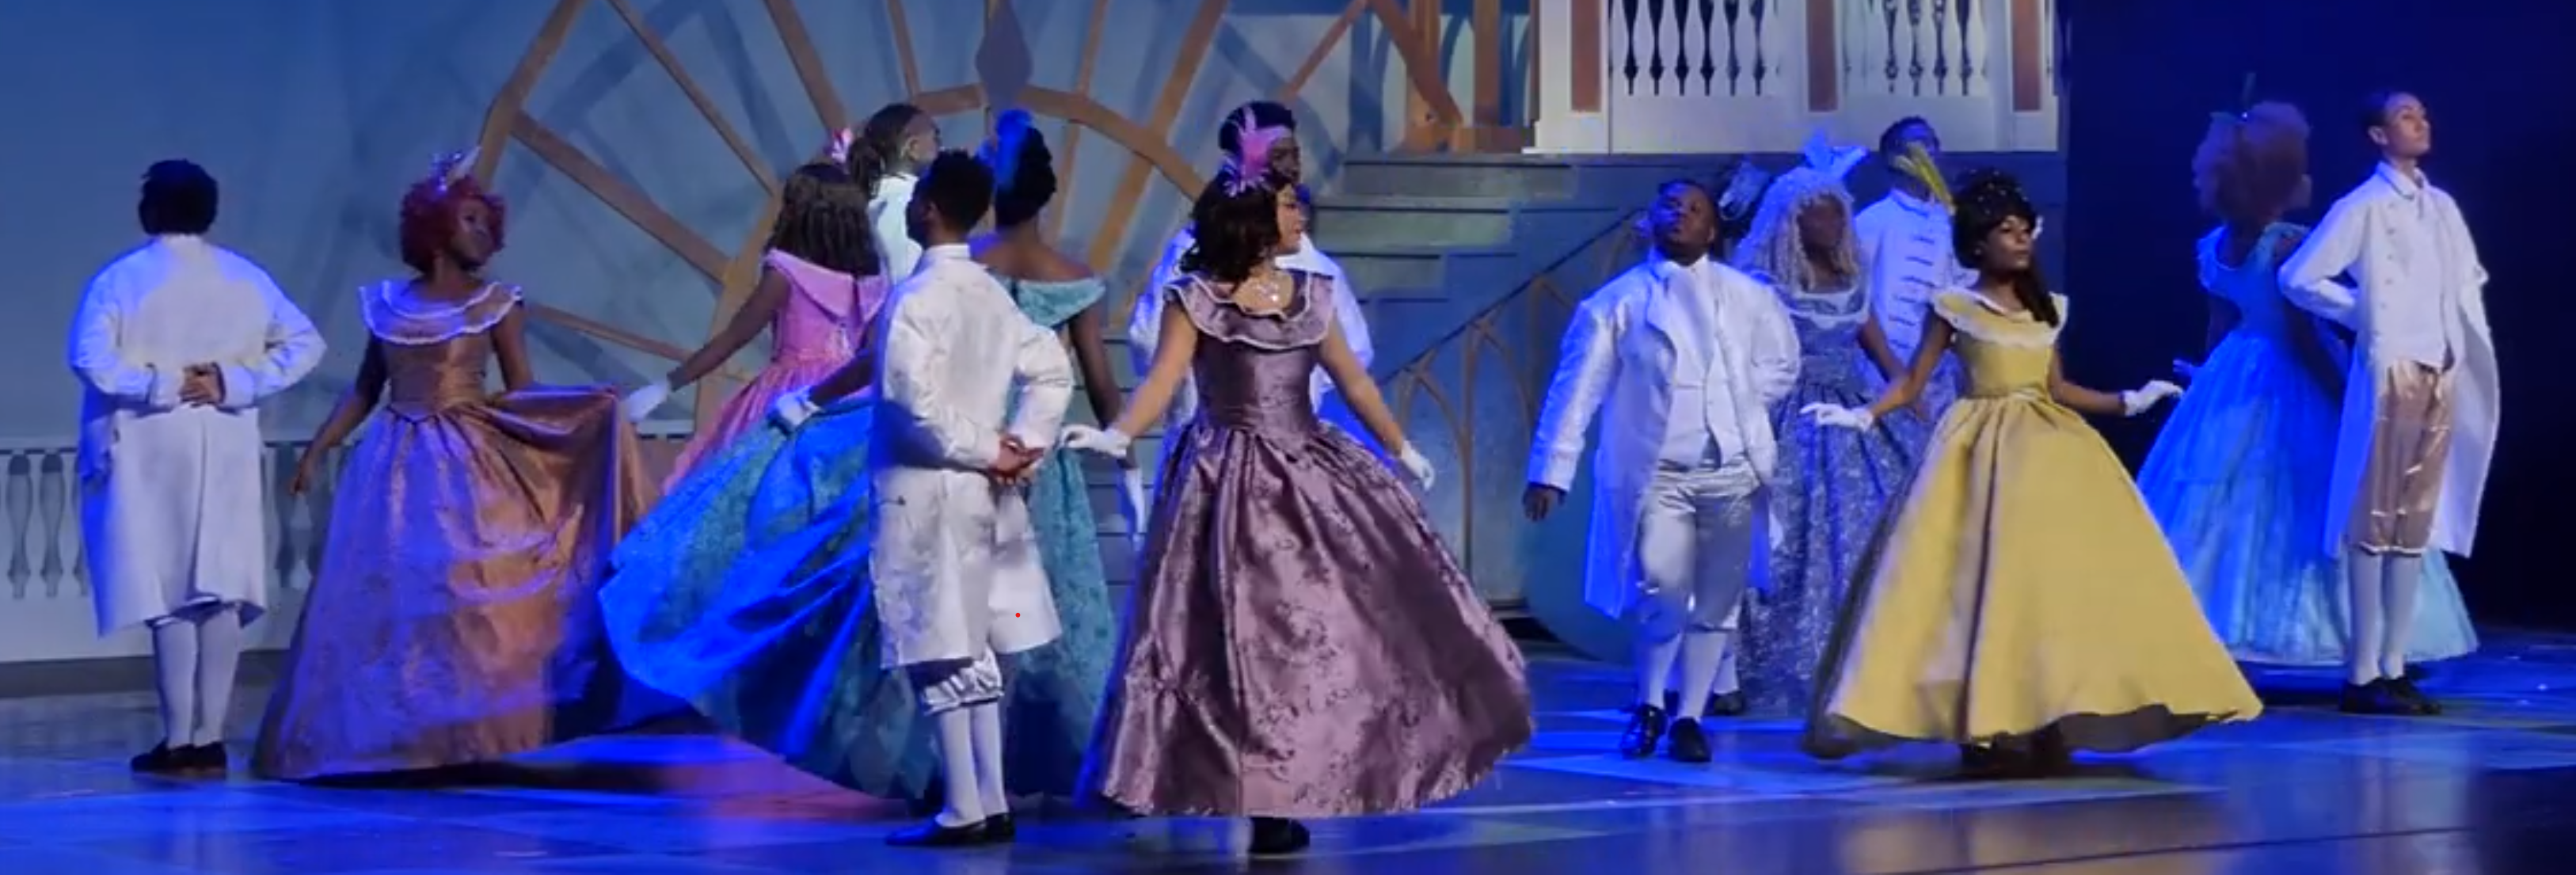 Cinderella broadway musical the ball ballgowns and suits costumes front row theatrical rental